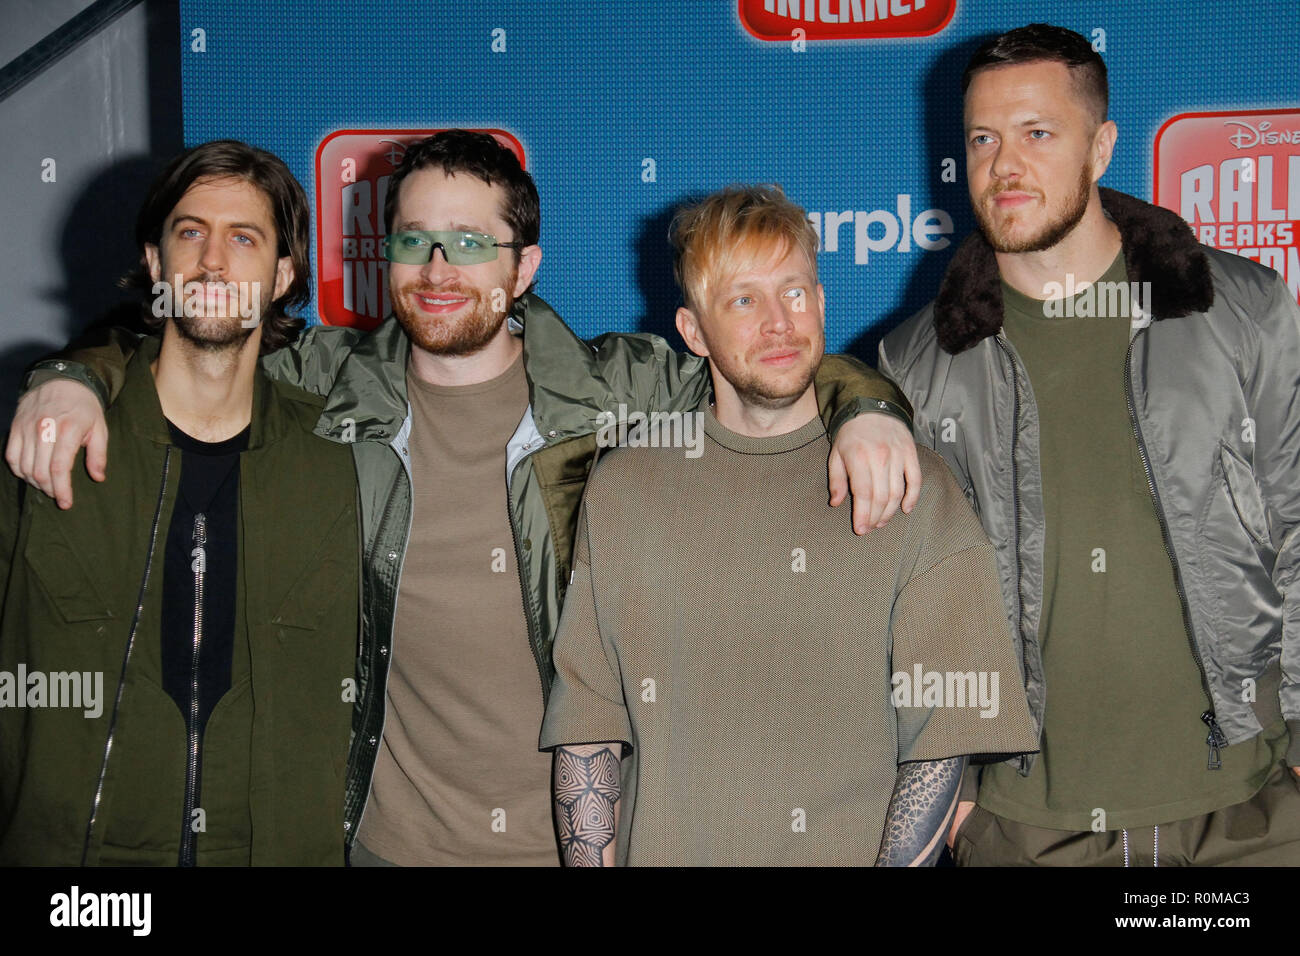 Los Angeles, USA. 5th Nov 2018. Imagine Dragons at the World Premiere of Disney's 'Ralph Breaks The Internet' held at El Capitan Theatre in Hollywood, CA, November 5, 2018. Photo by Joseph Martinez / PictureLux Credit: PictureLux / The Hollywood Archive/Alamy Live News Stock Photo